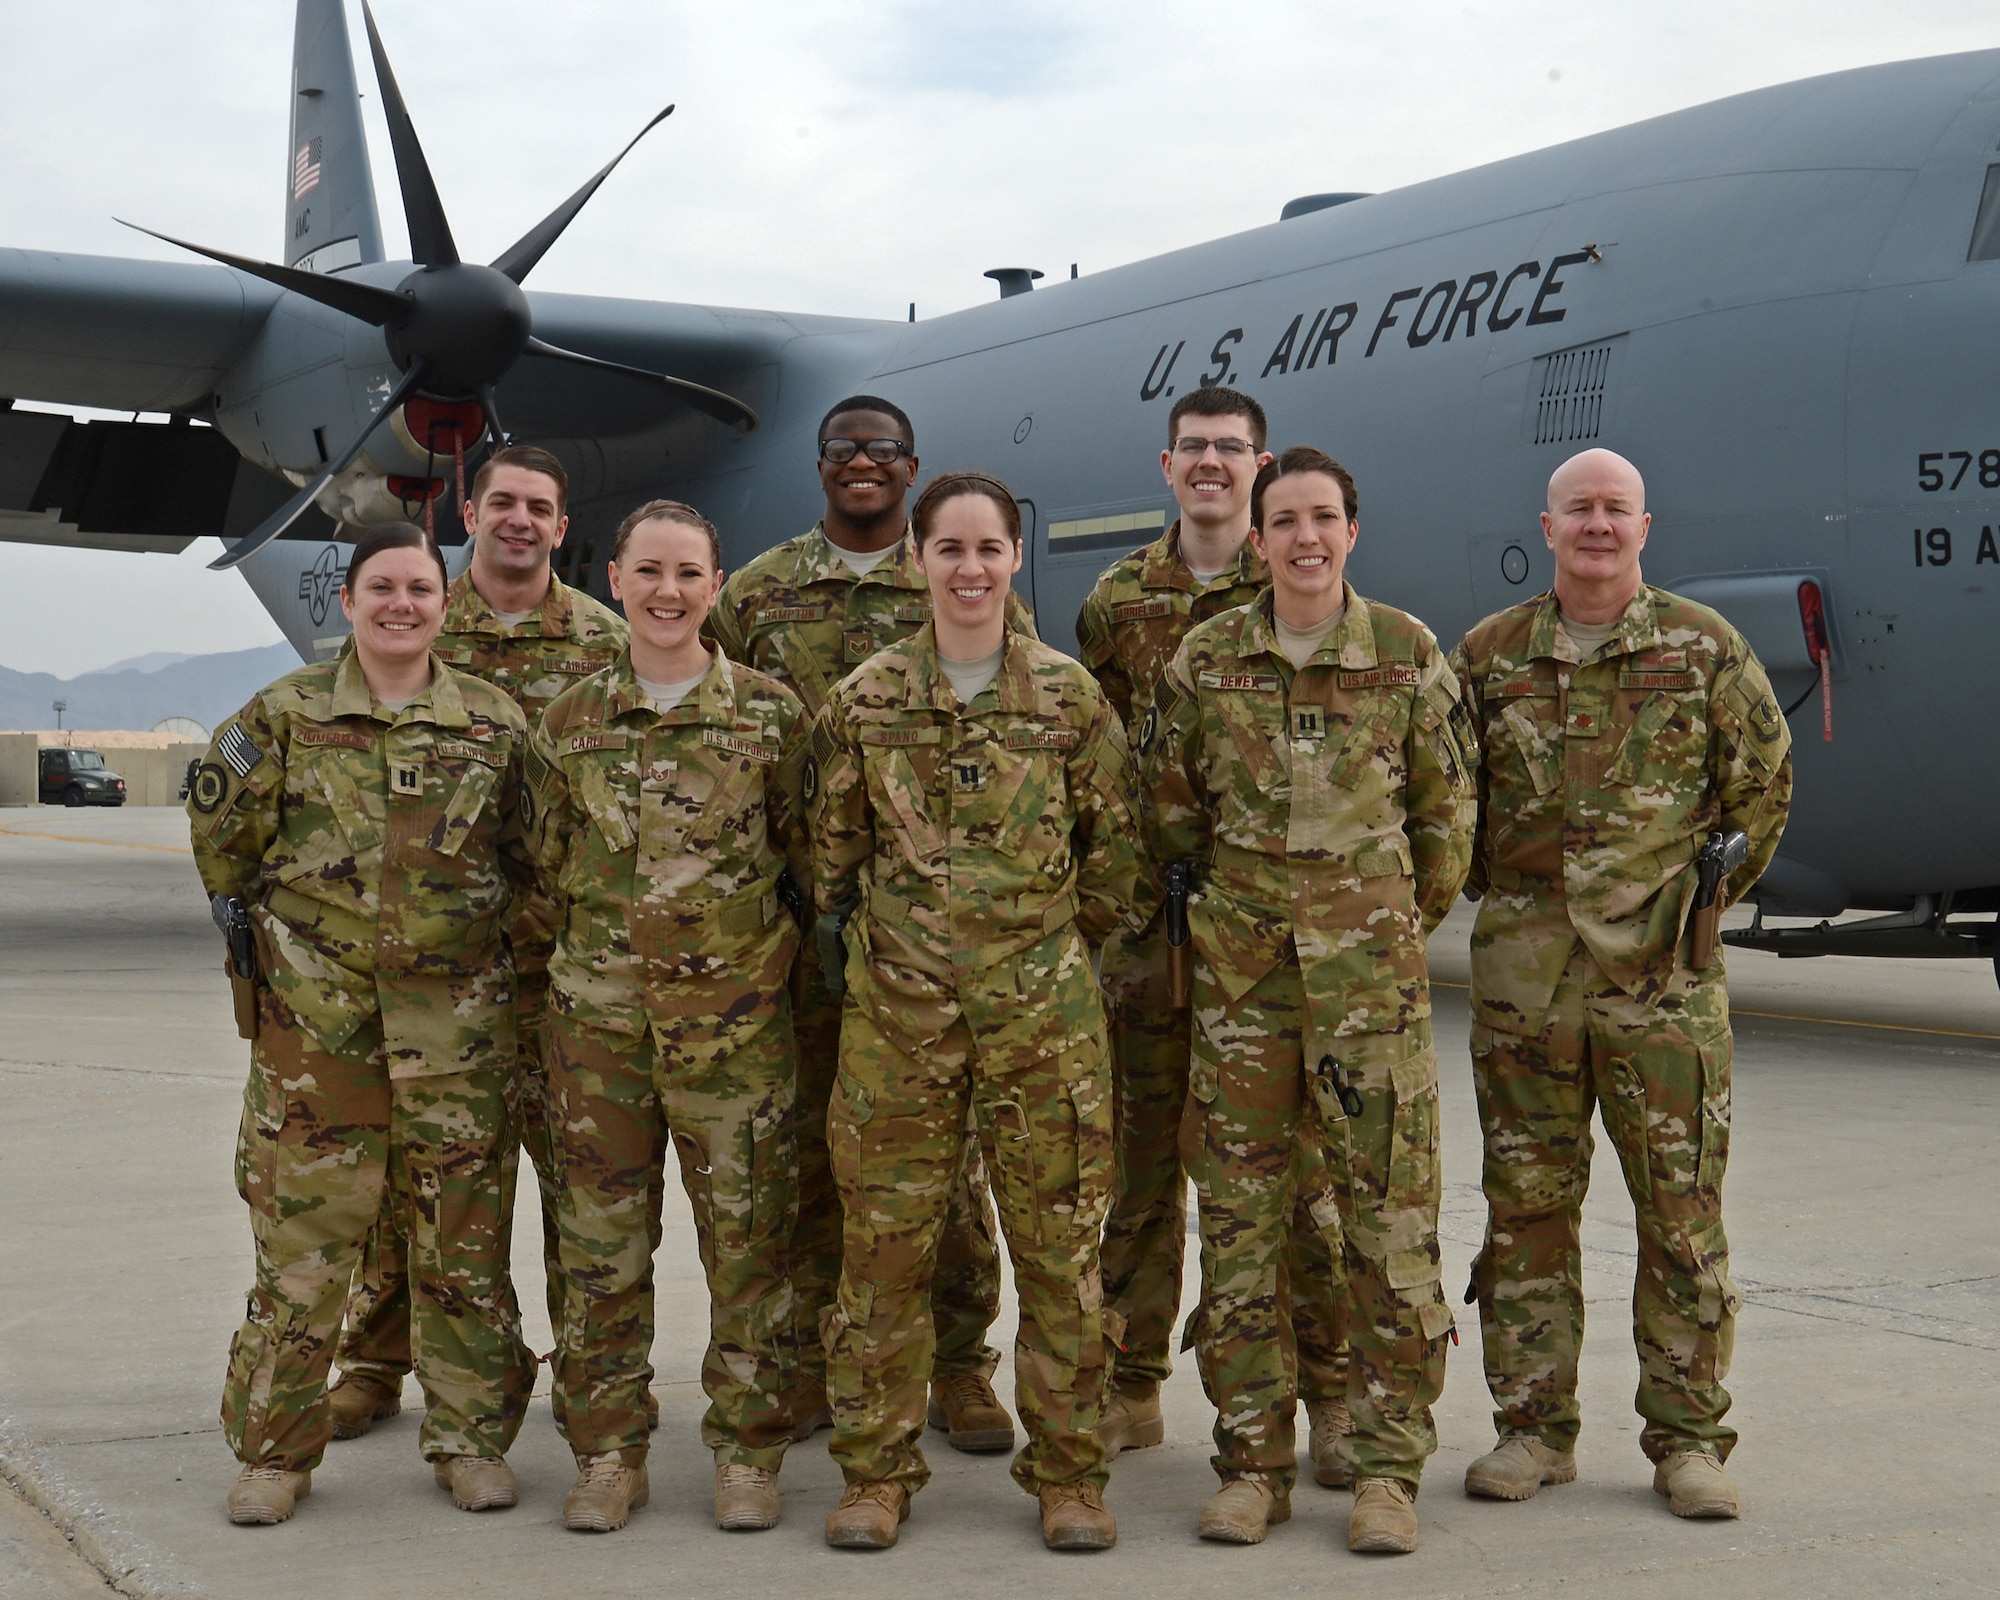 Aeromedical Evacuation and Critical Care Air Transport Team members from the 455th Expeditionary Aeromedical Evacuation Squadron pose for a photo Mar. 10, 2018 at Bagram Airfield, Afghanistan.